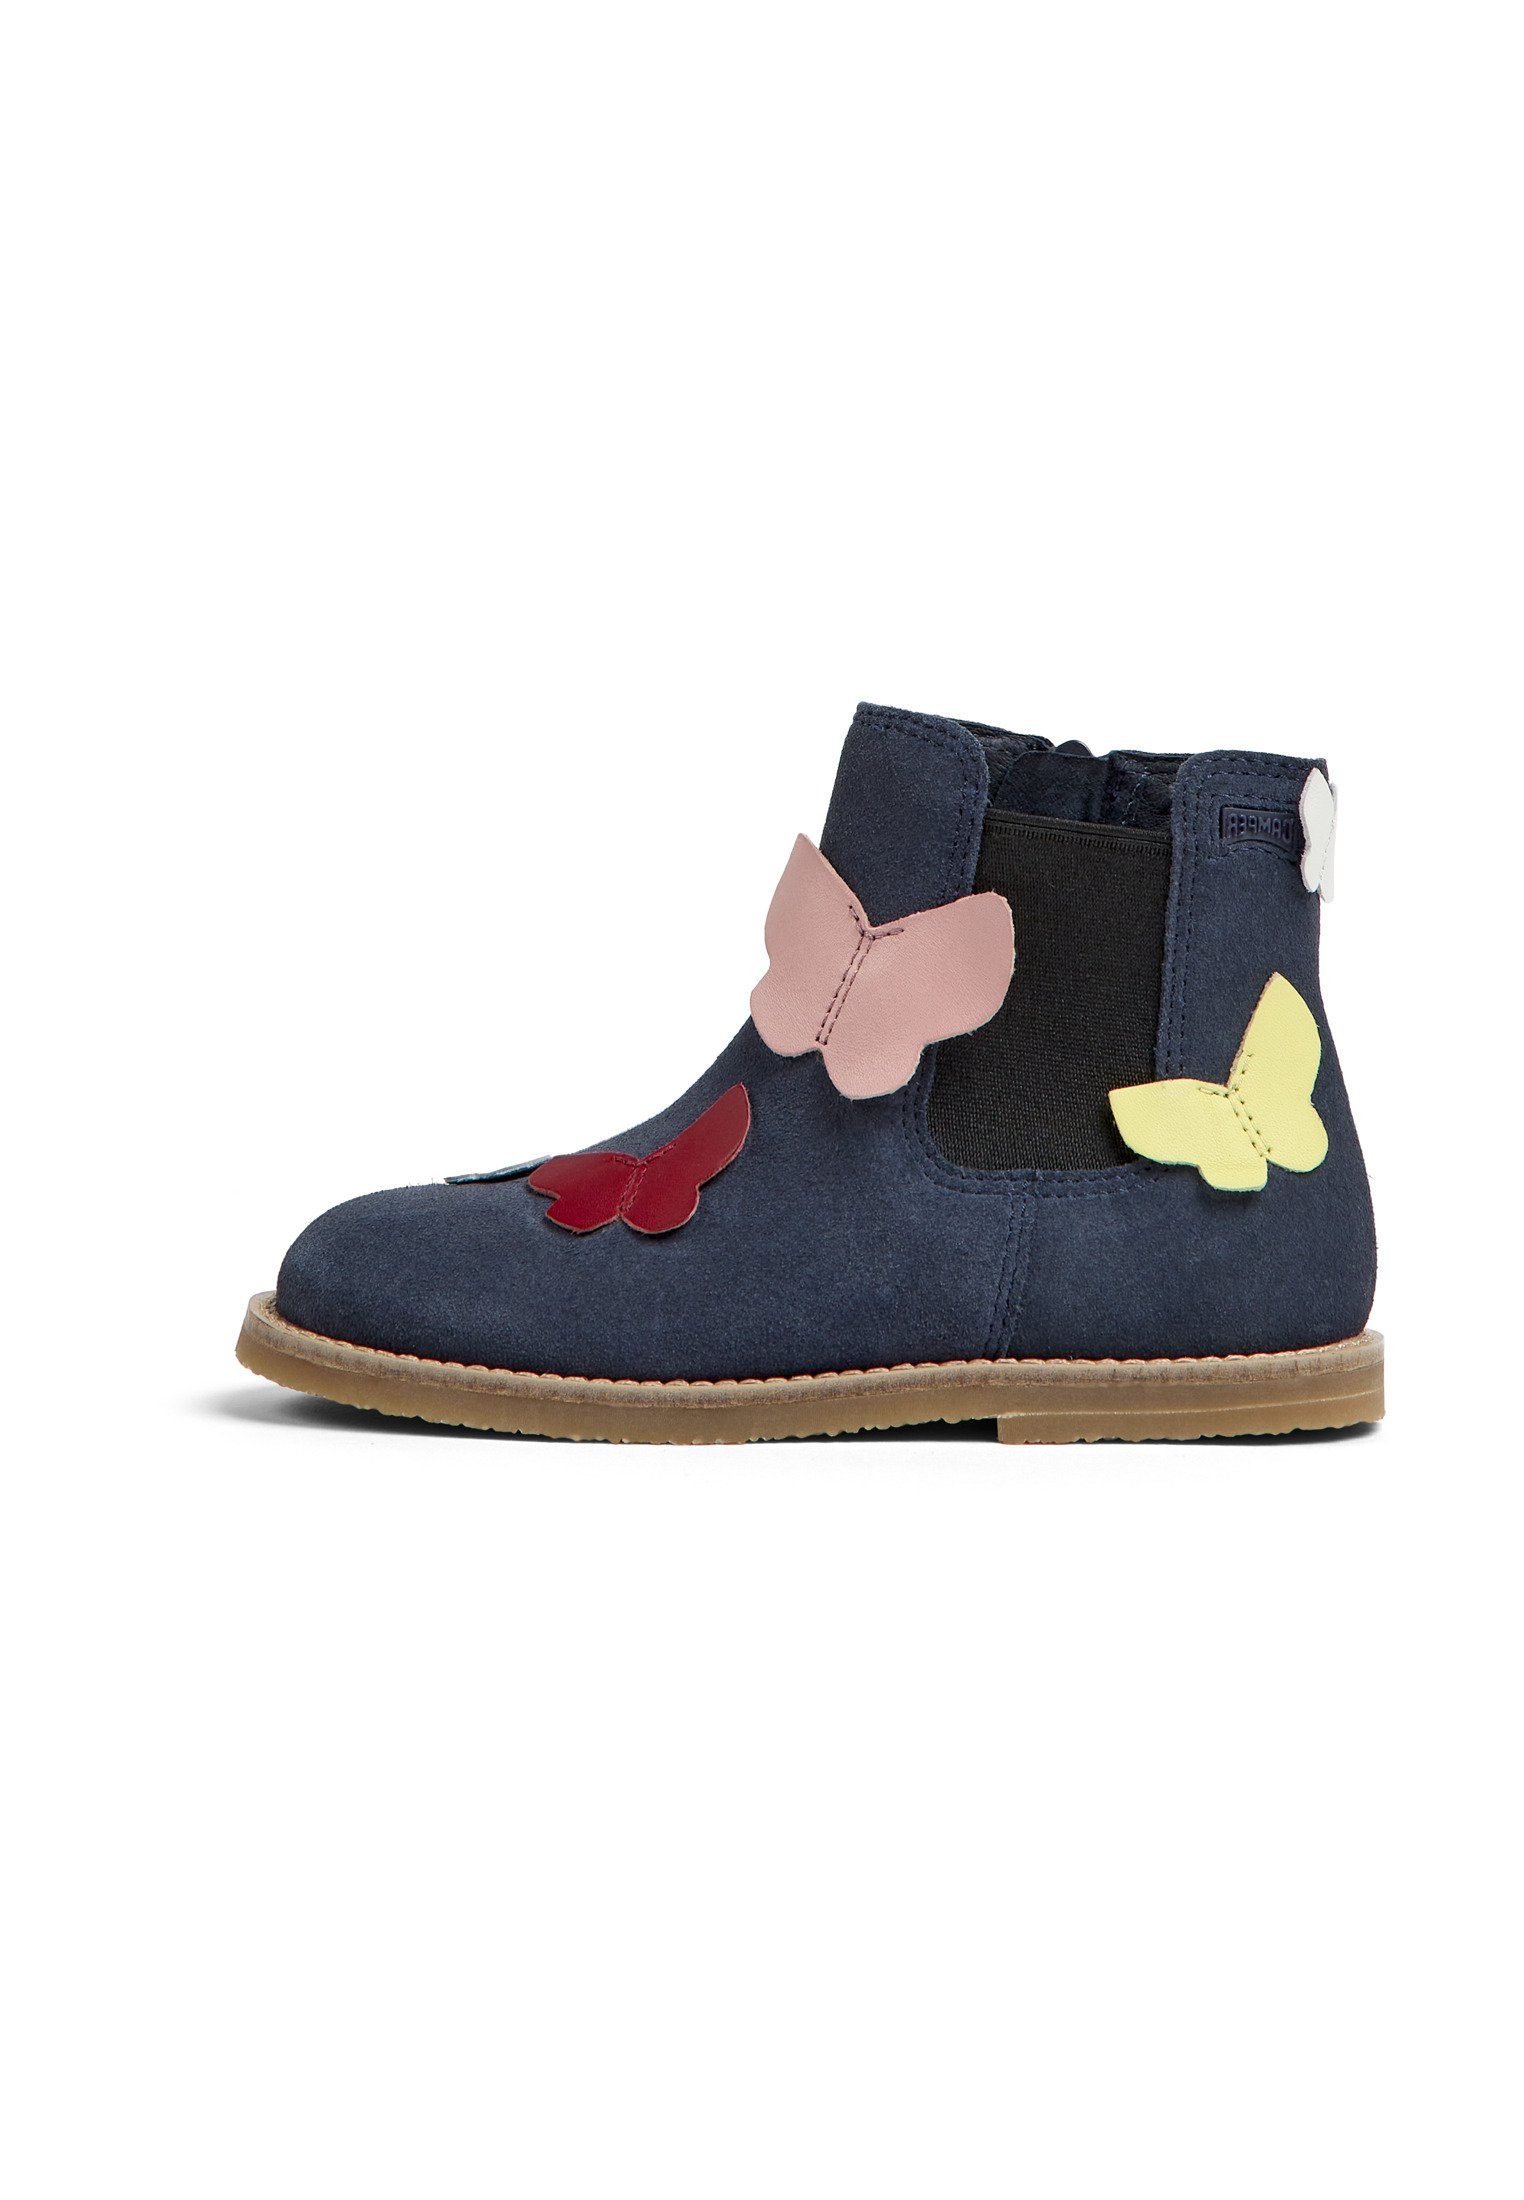 Camper SAVINA TWINS Ankleboots | Ankle Boots